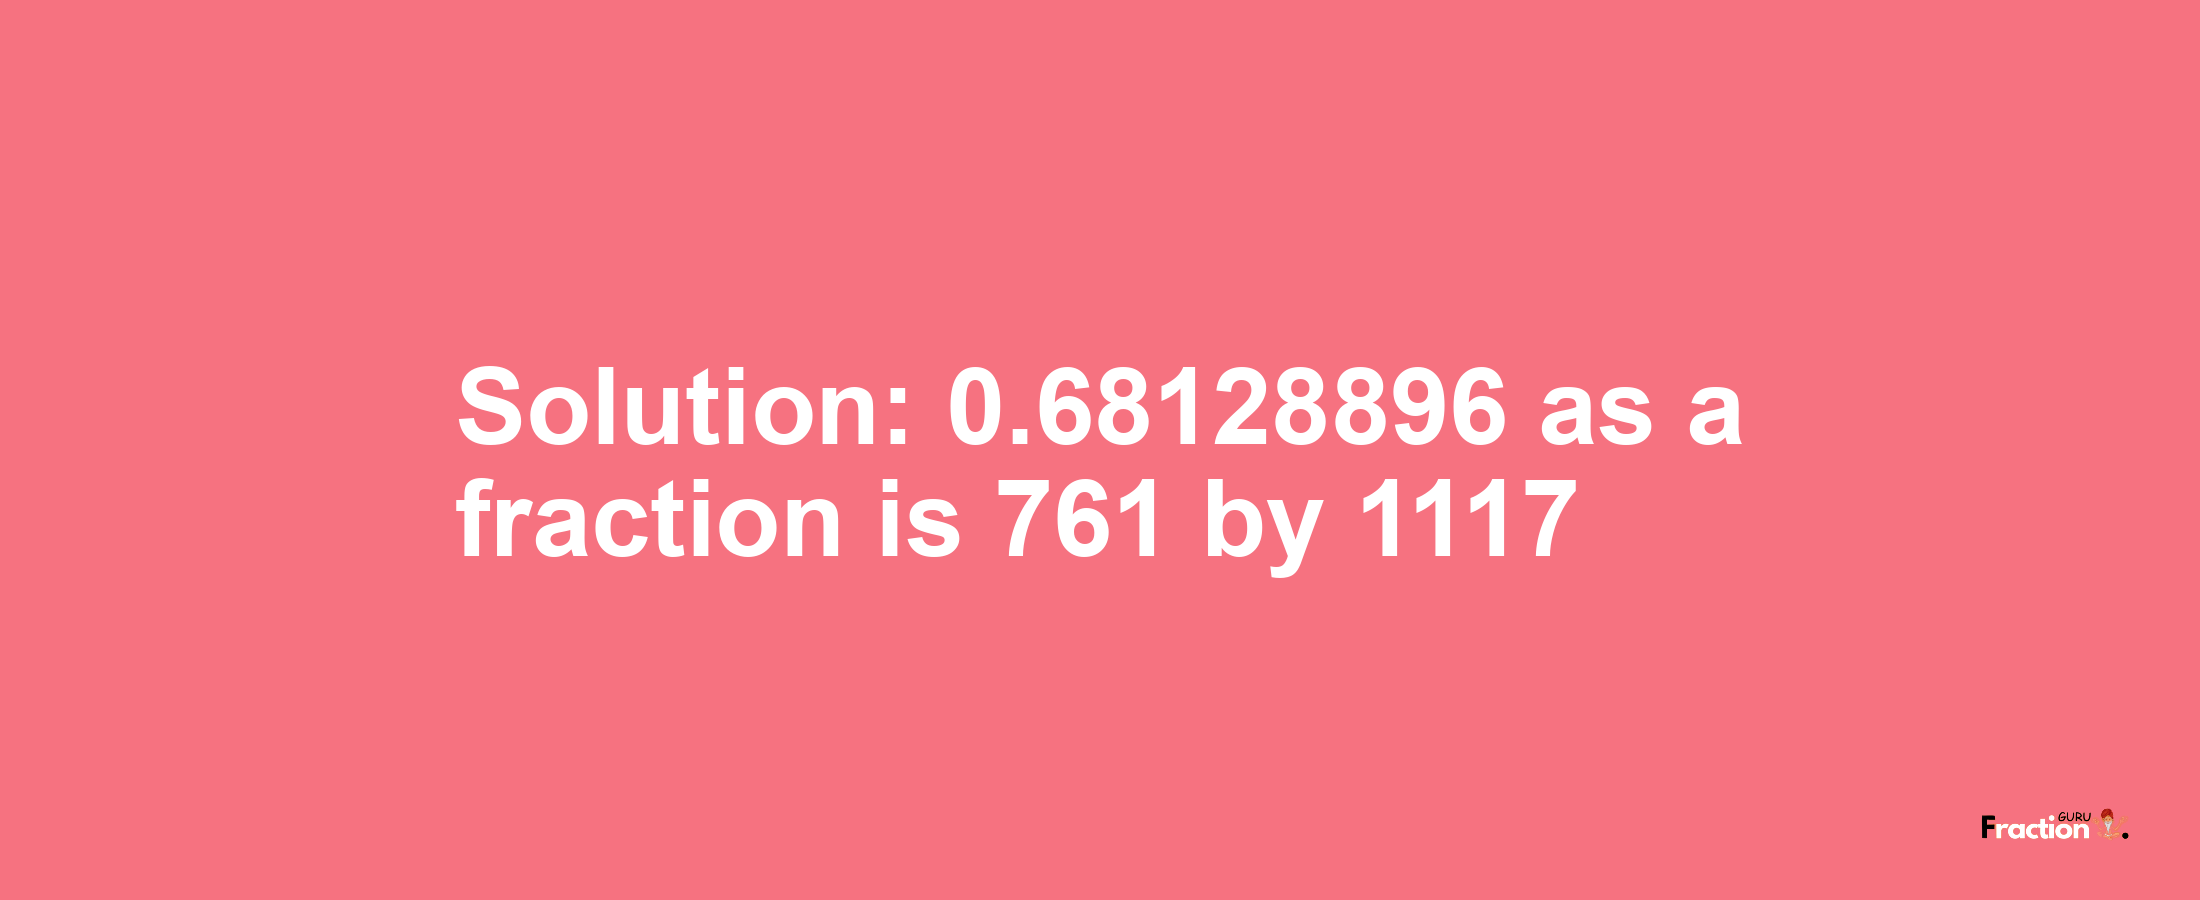 Solution:0.68128896 as a fraction is 761/1117